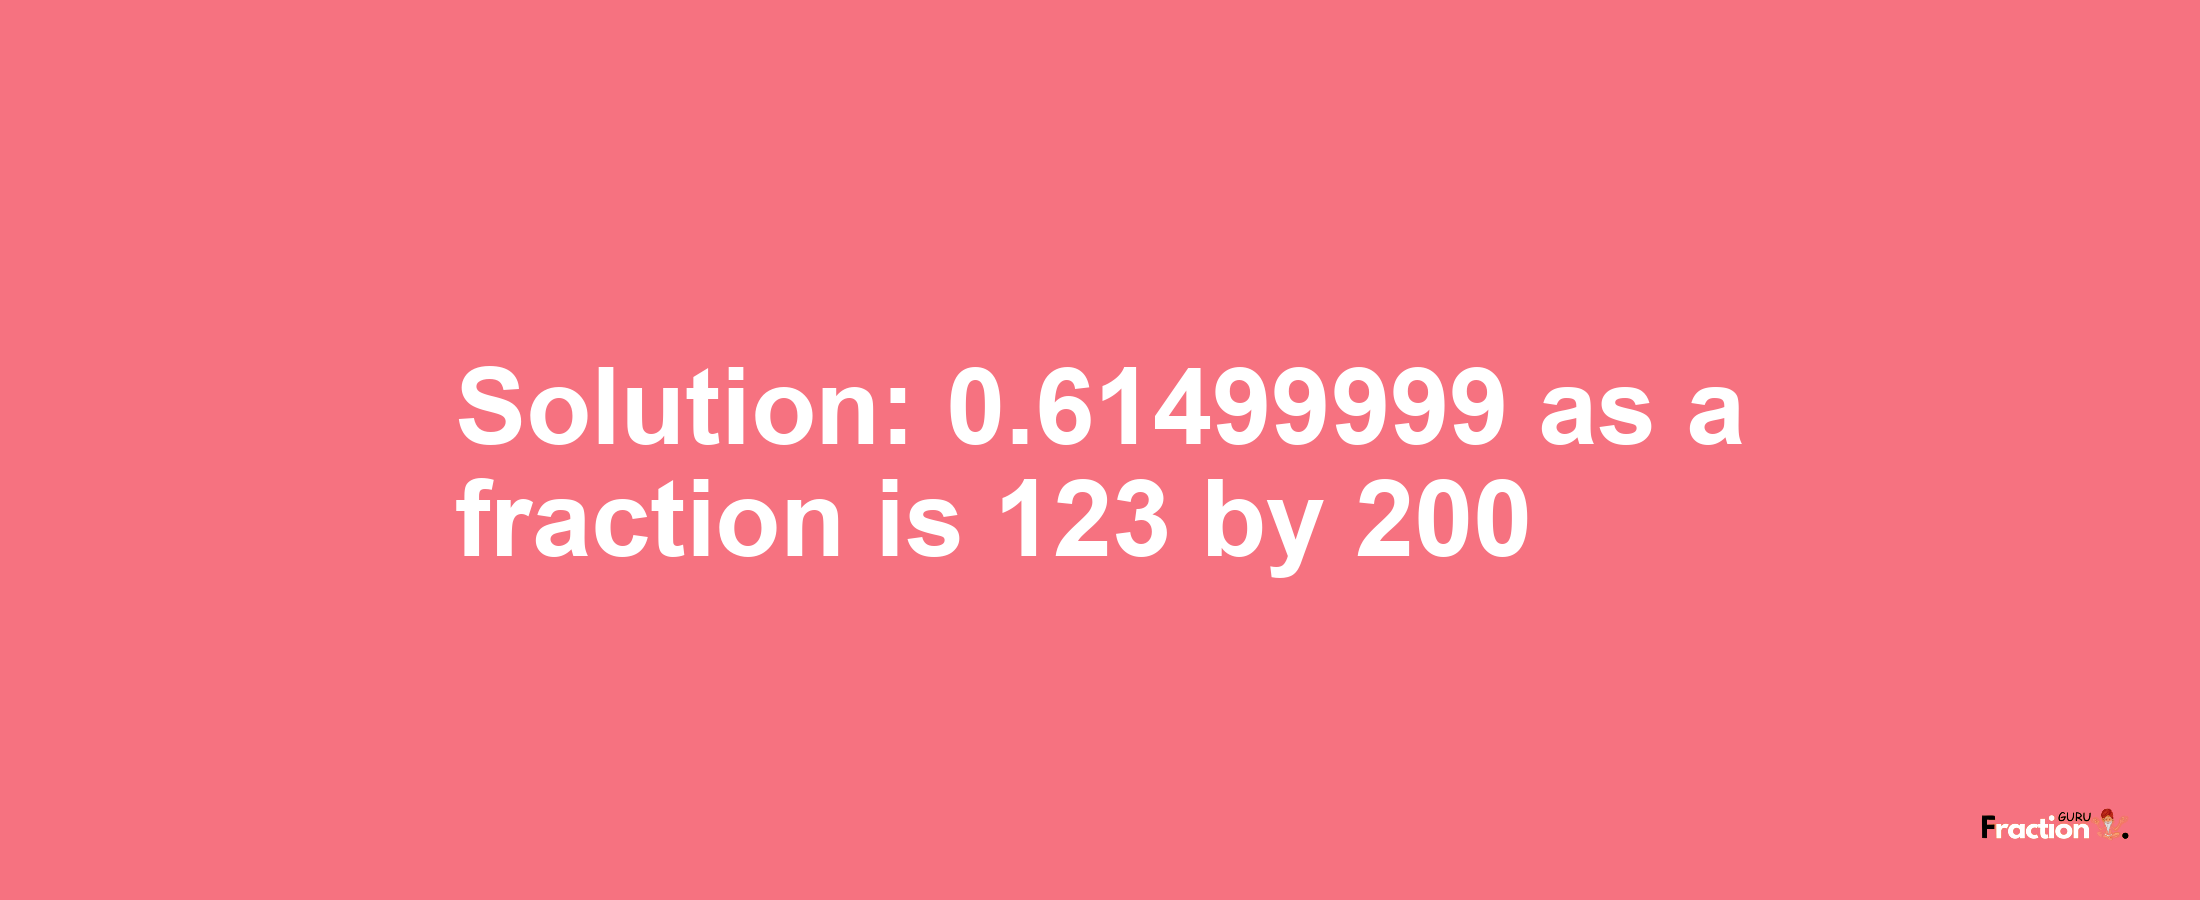 Solution:0.61499999 as a fraction is 123/200